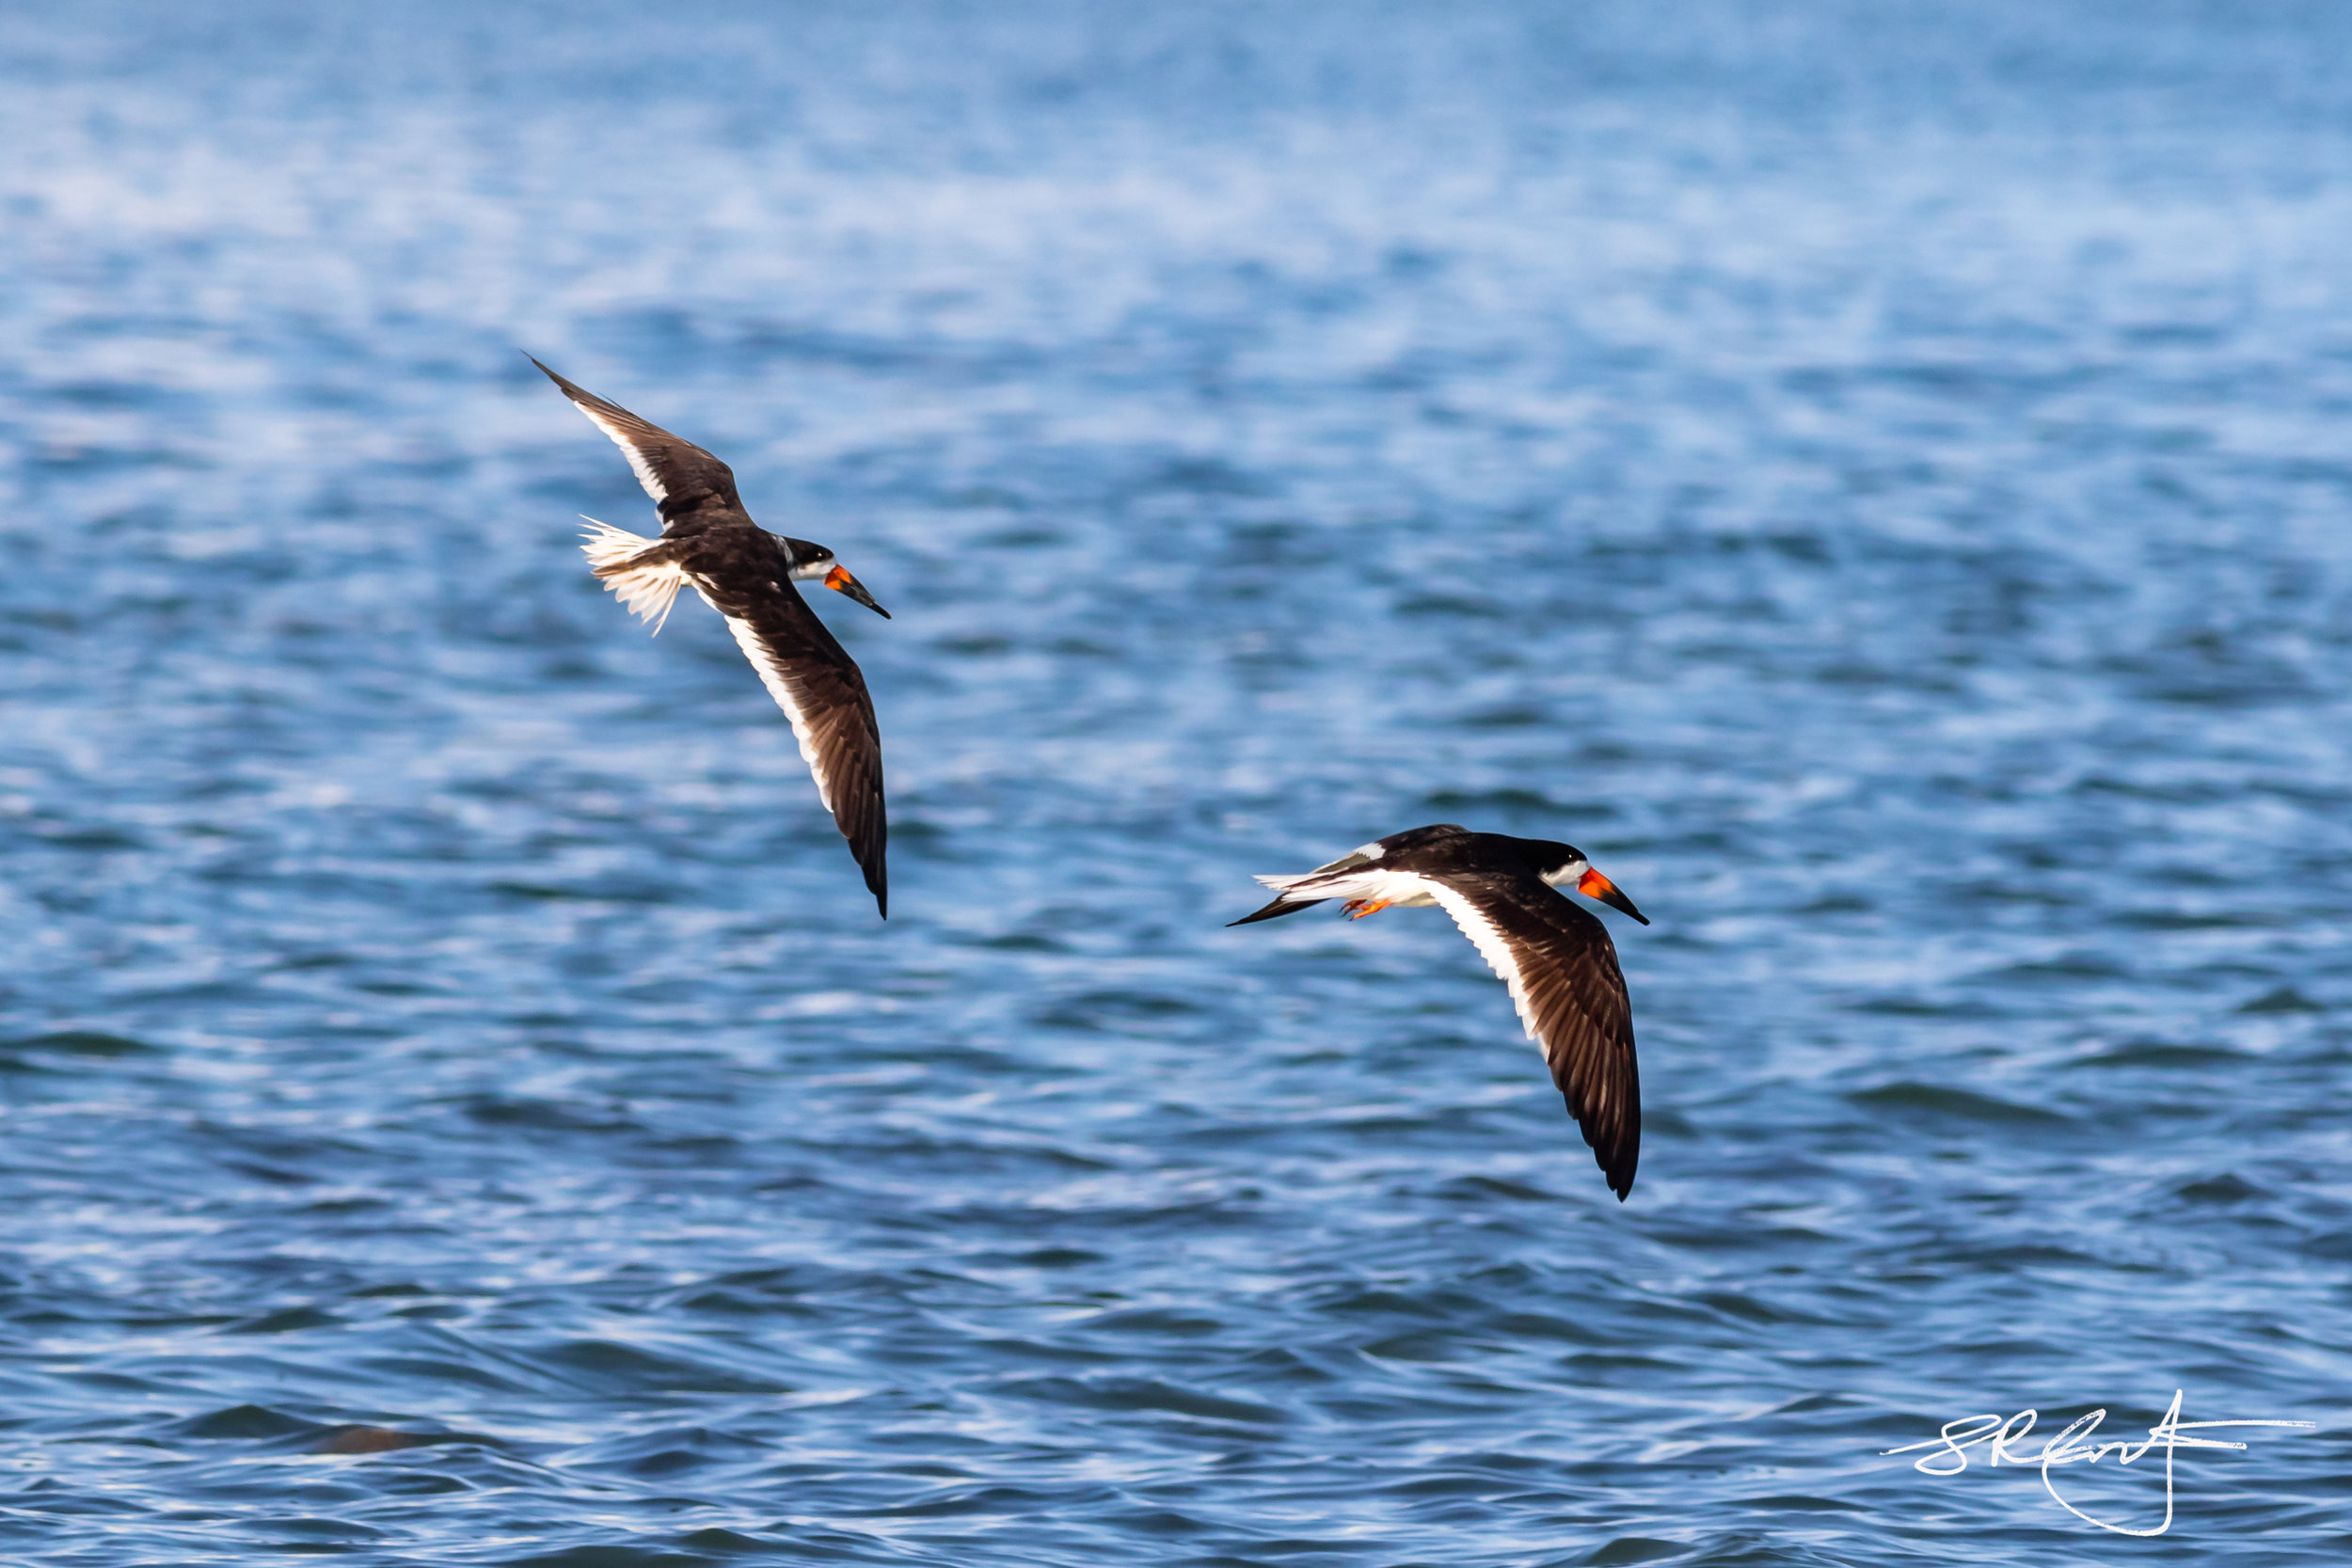 A pair of Skimmers